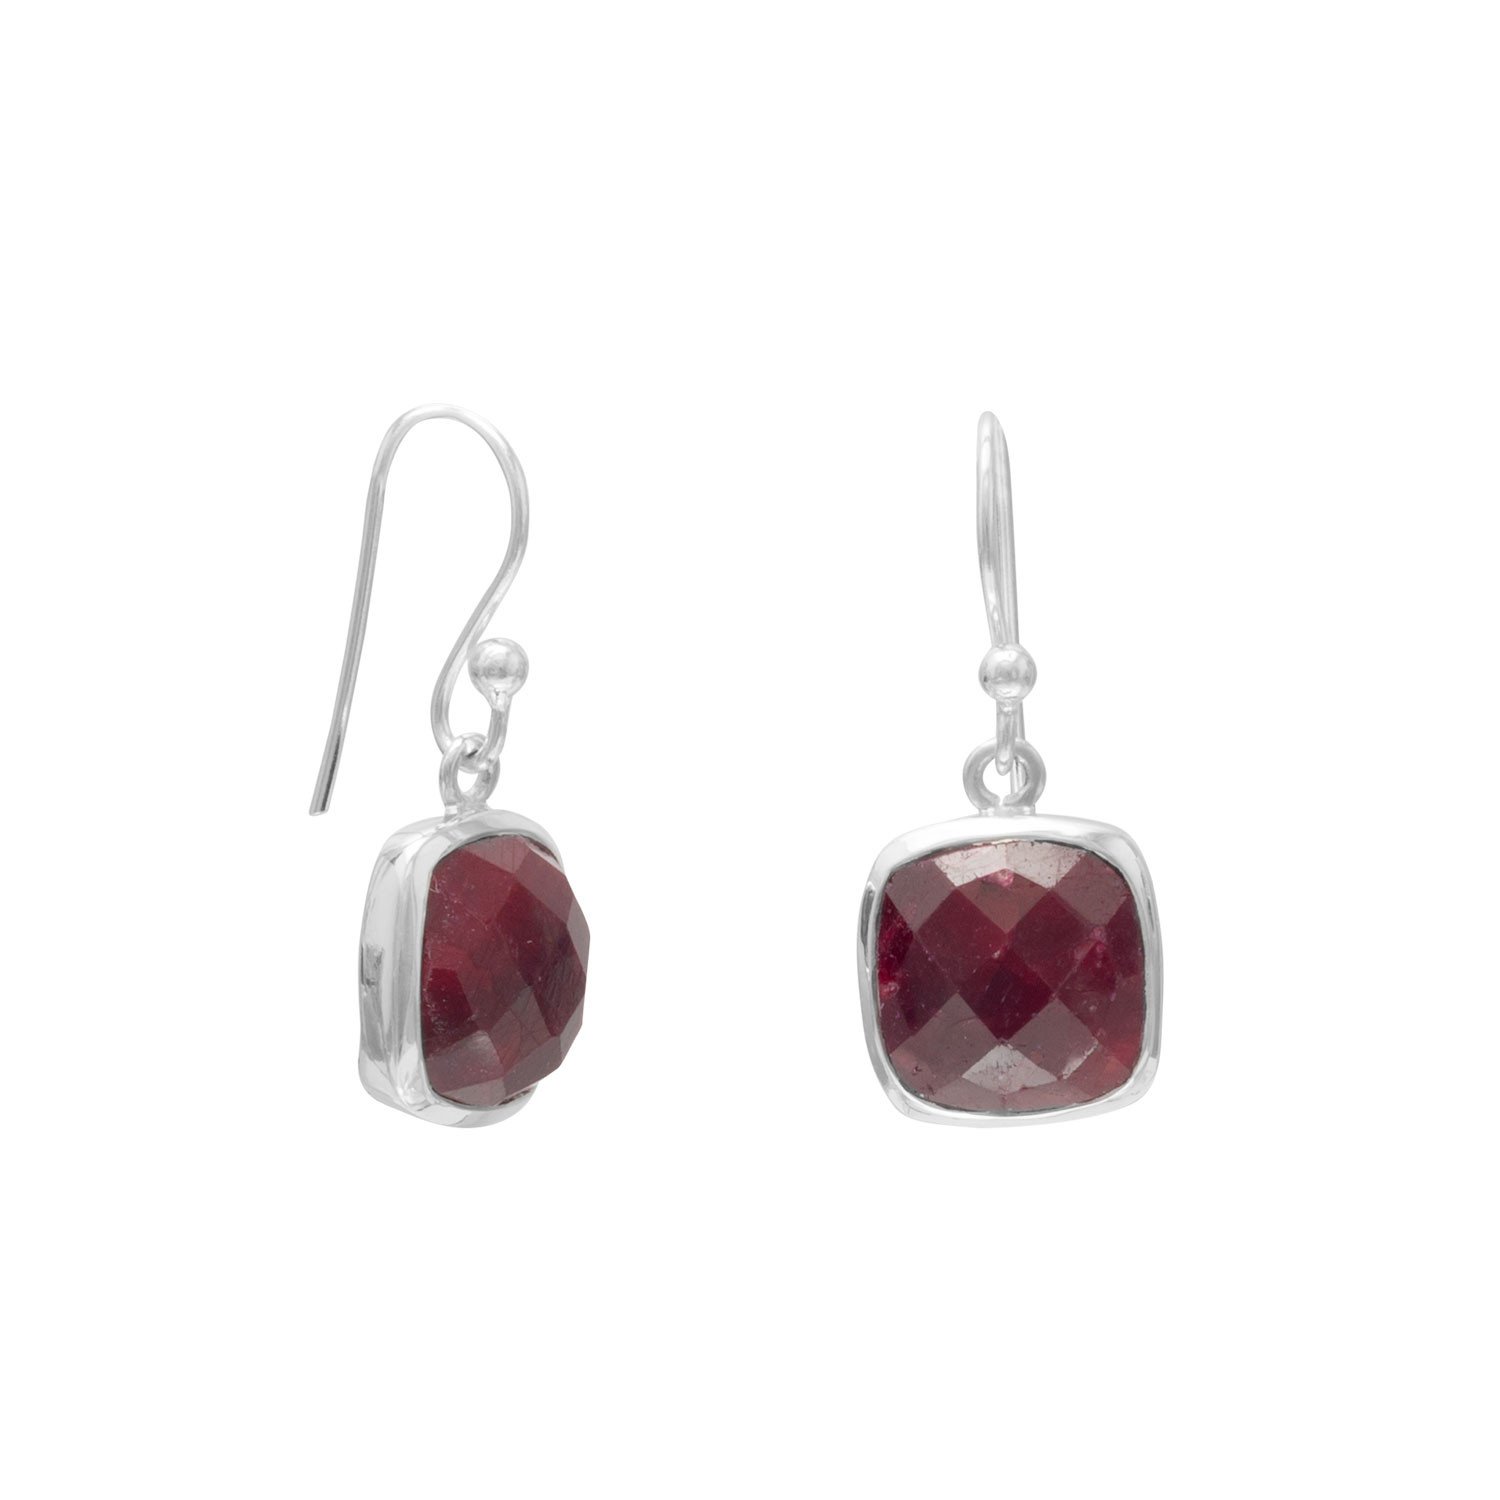 Square Faceted Corundum Earrings